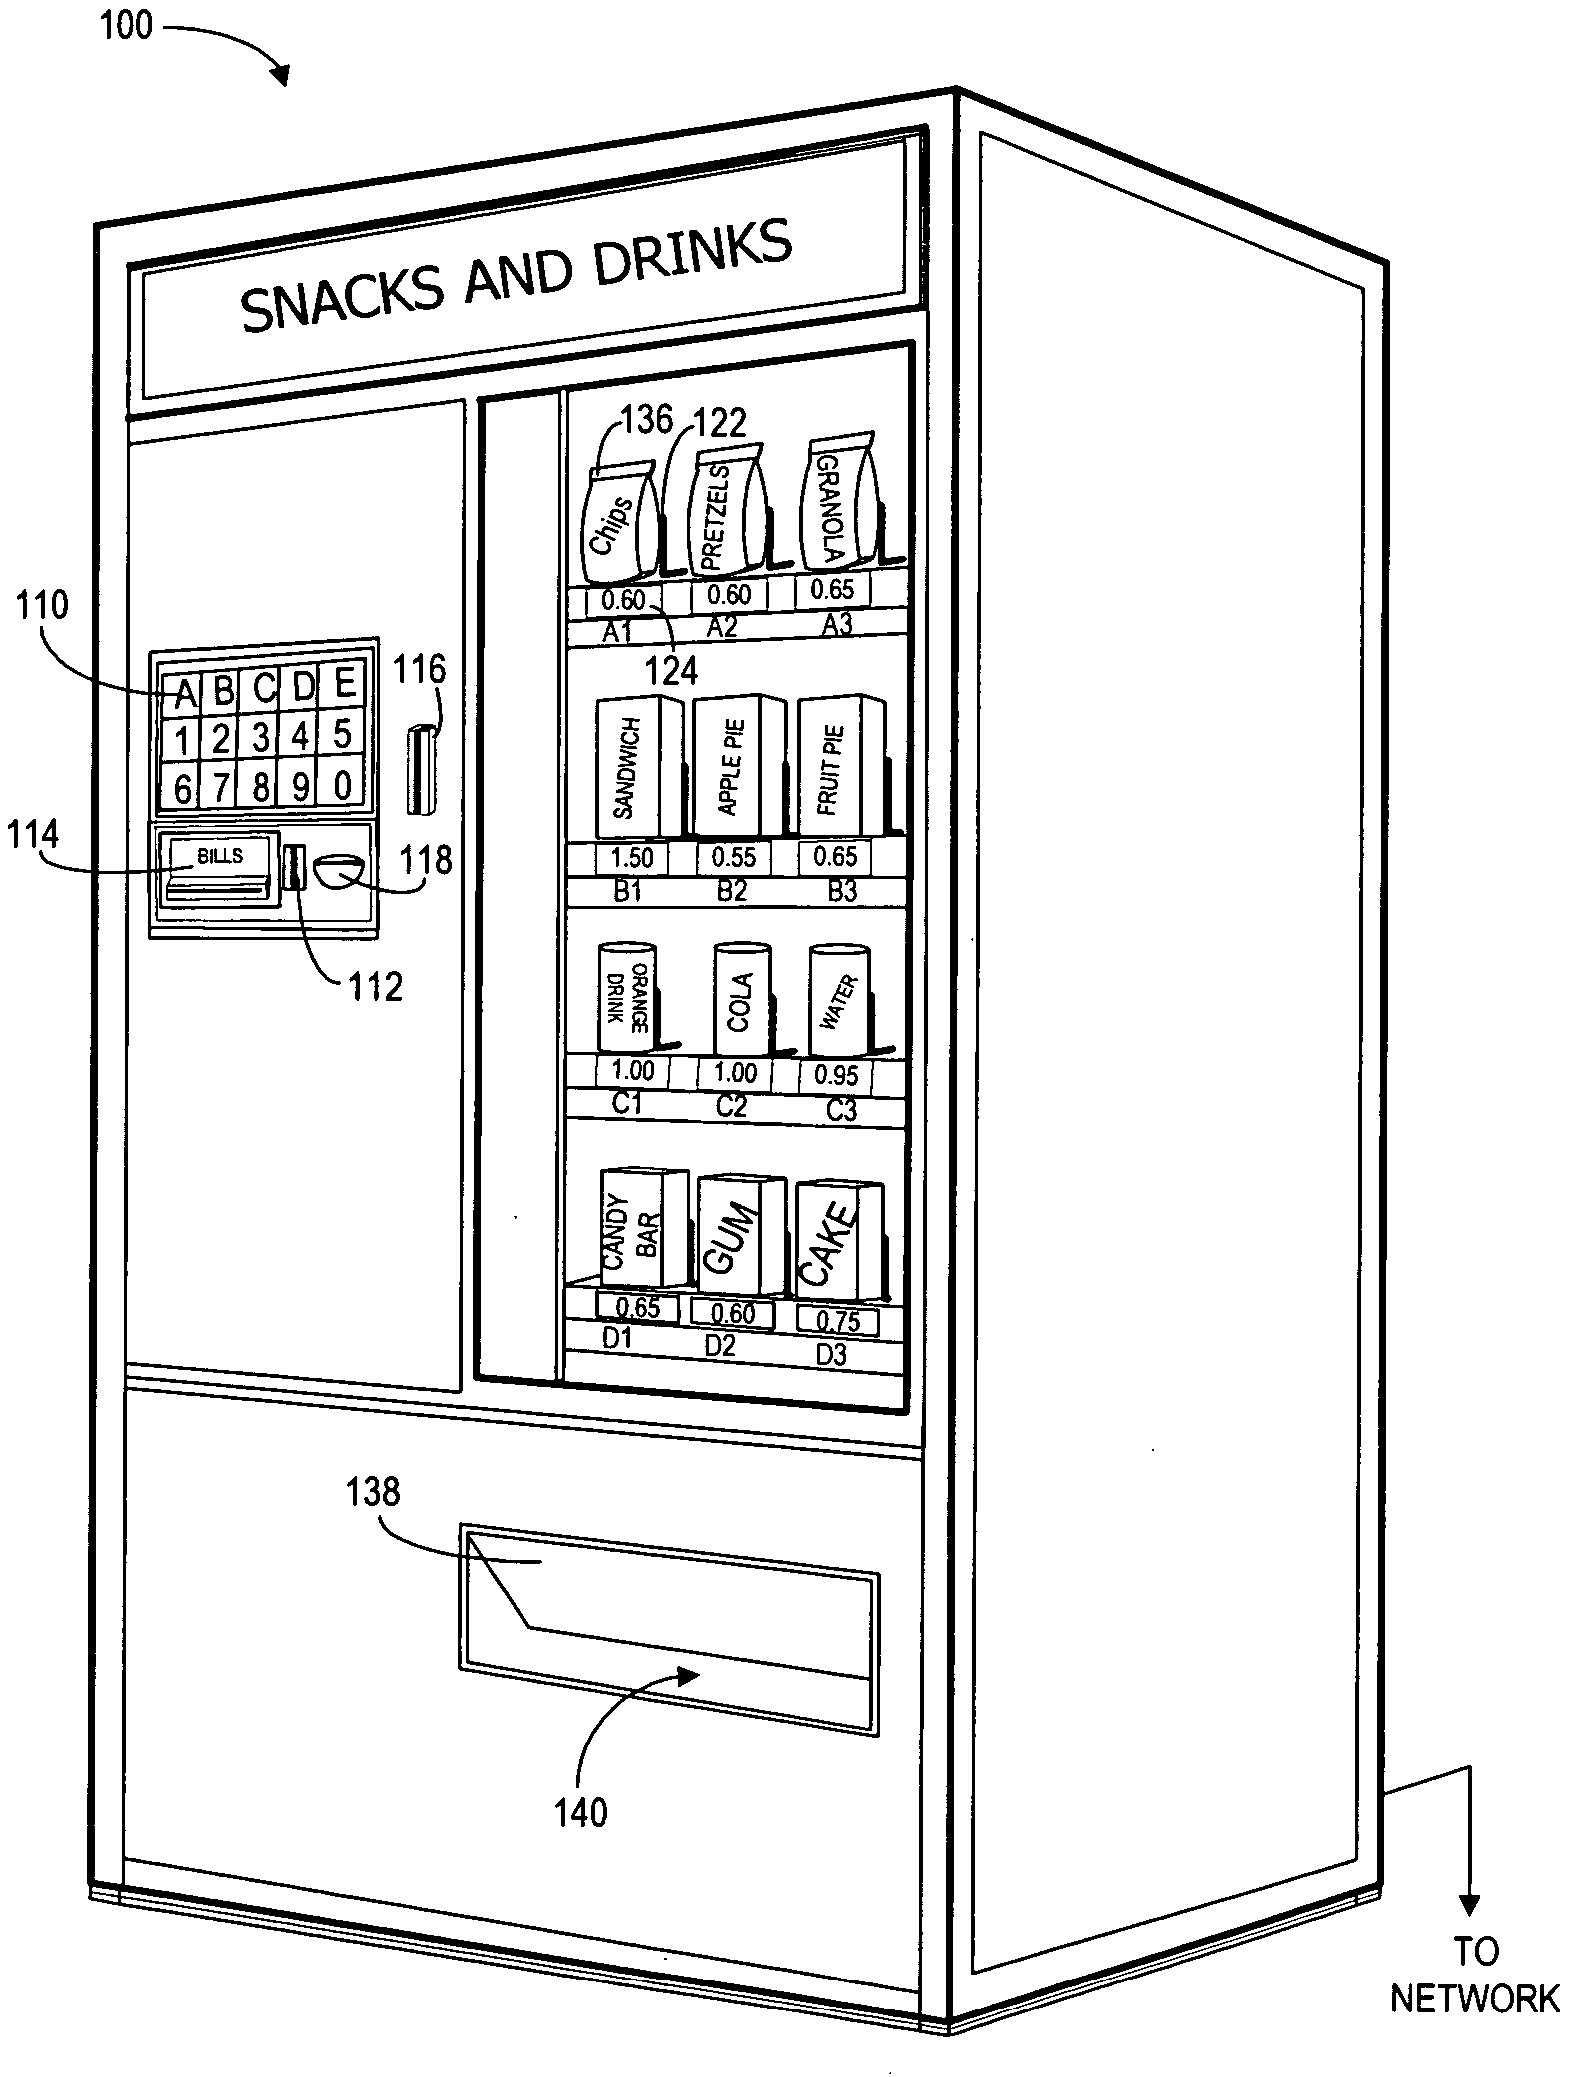 Products and processes for managing the prices of vending machine inventory